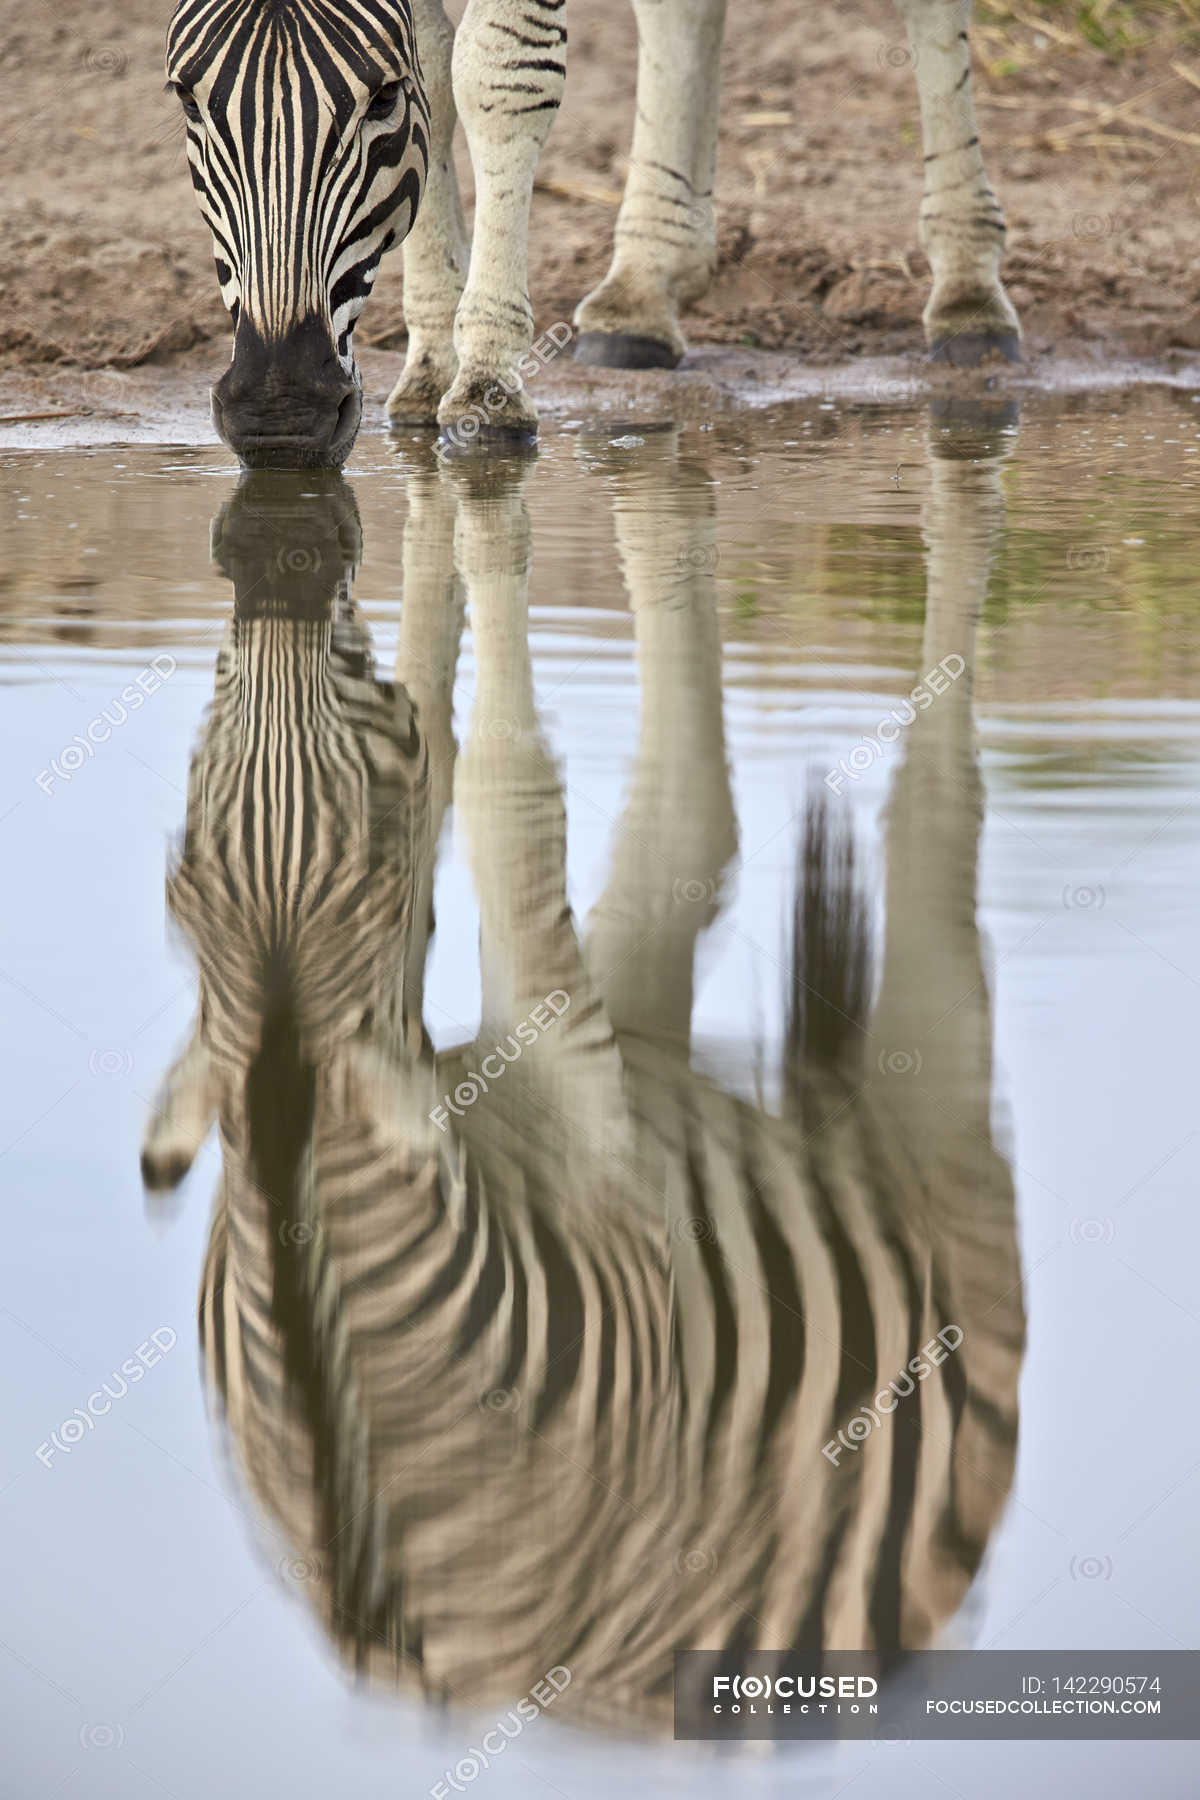 Common zebra reflection in water surface — Stock Photo | #142290574